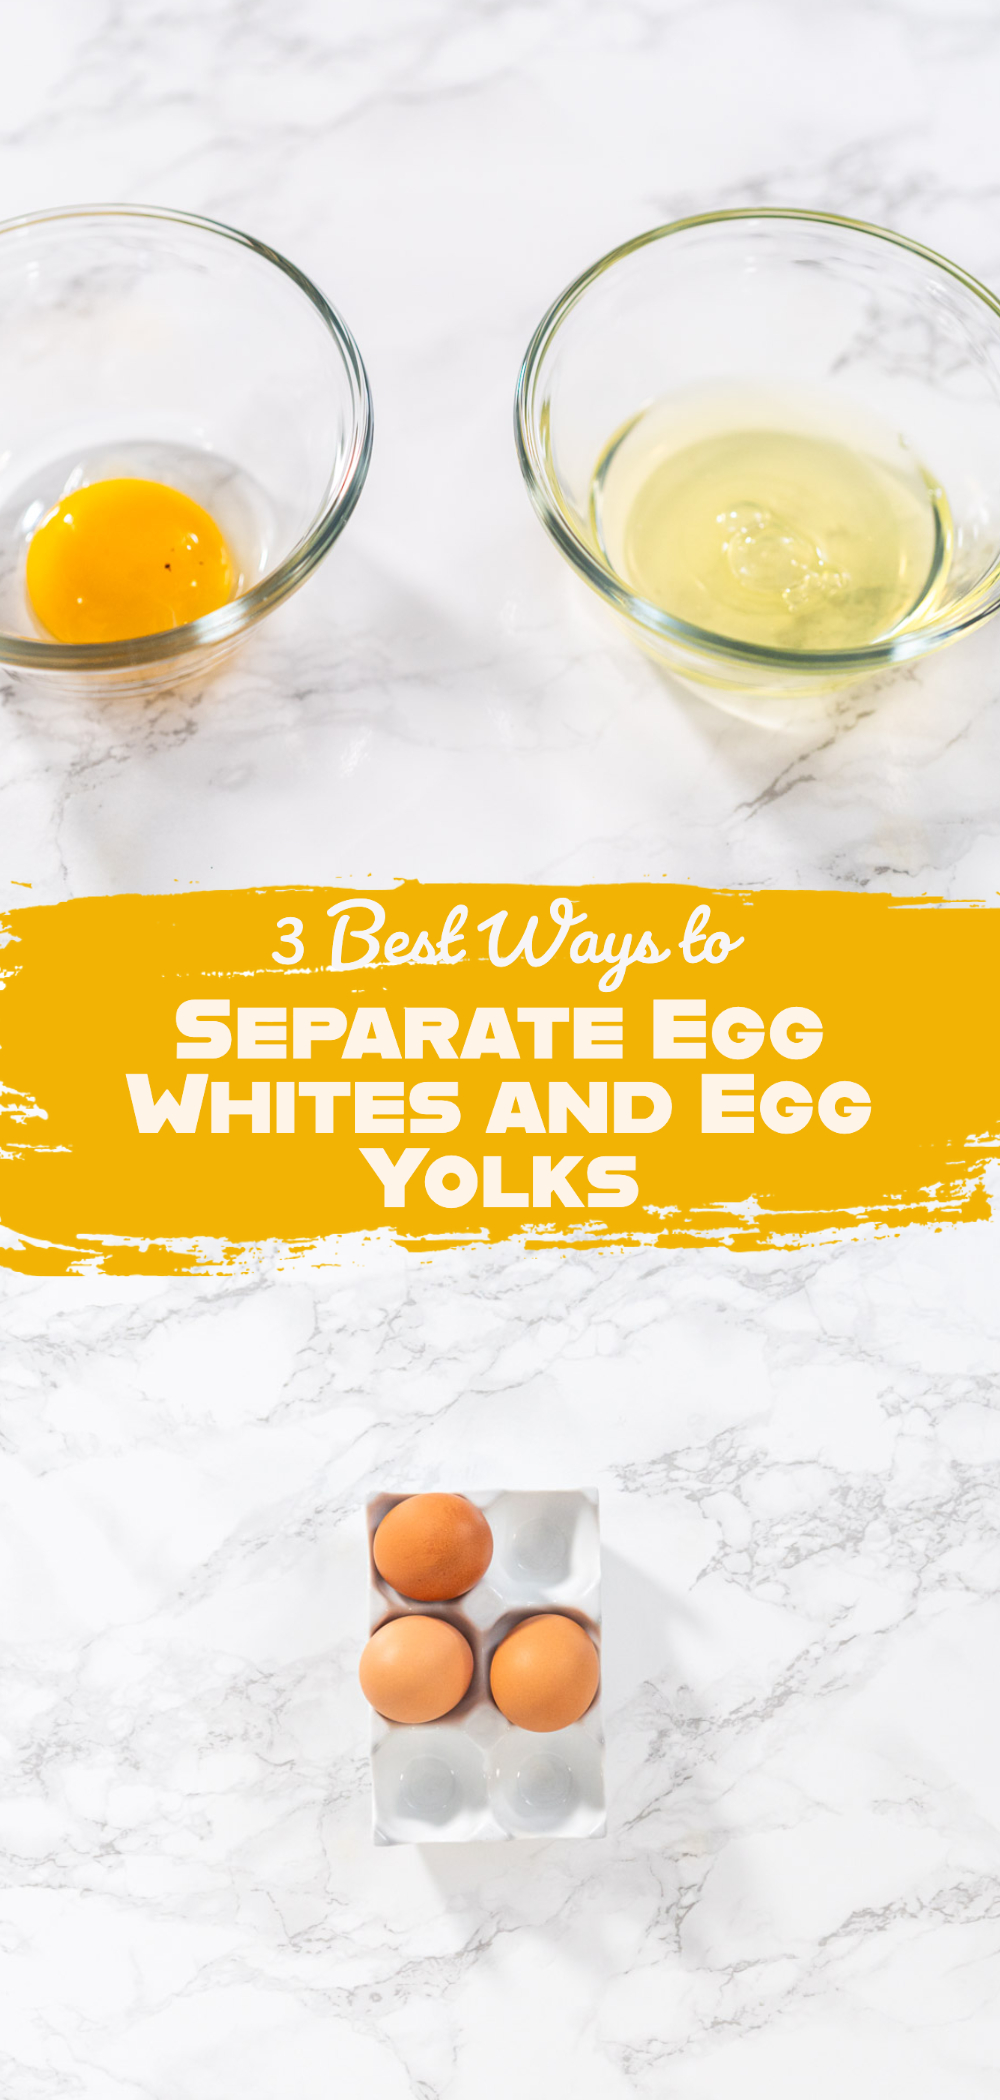 3 Best Ways to Separate Egg Whites and Egg Yolks